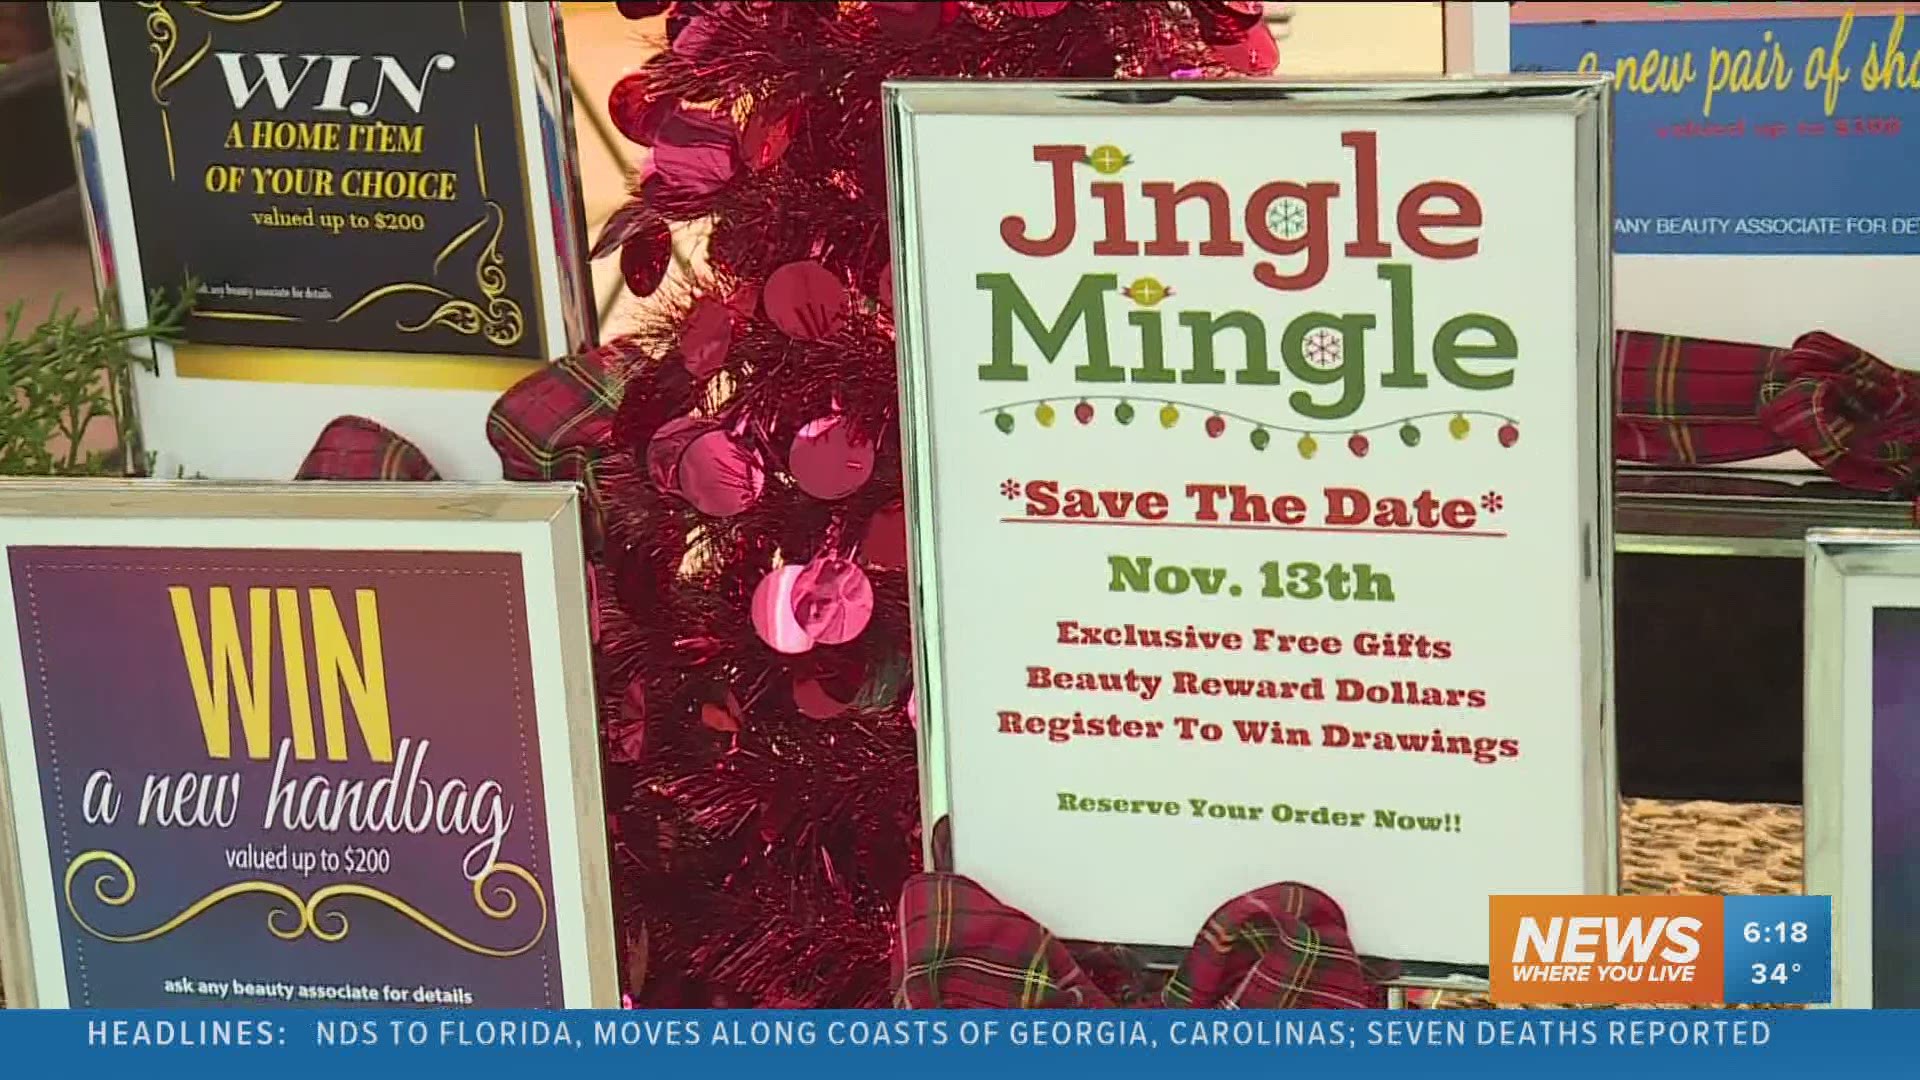 Dillard's at Central Mall in Fort Smith is hosting its annual Jingle Mingle Holiday Extravaganza.